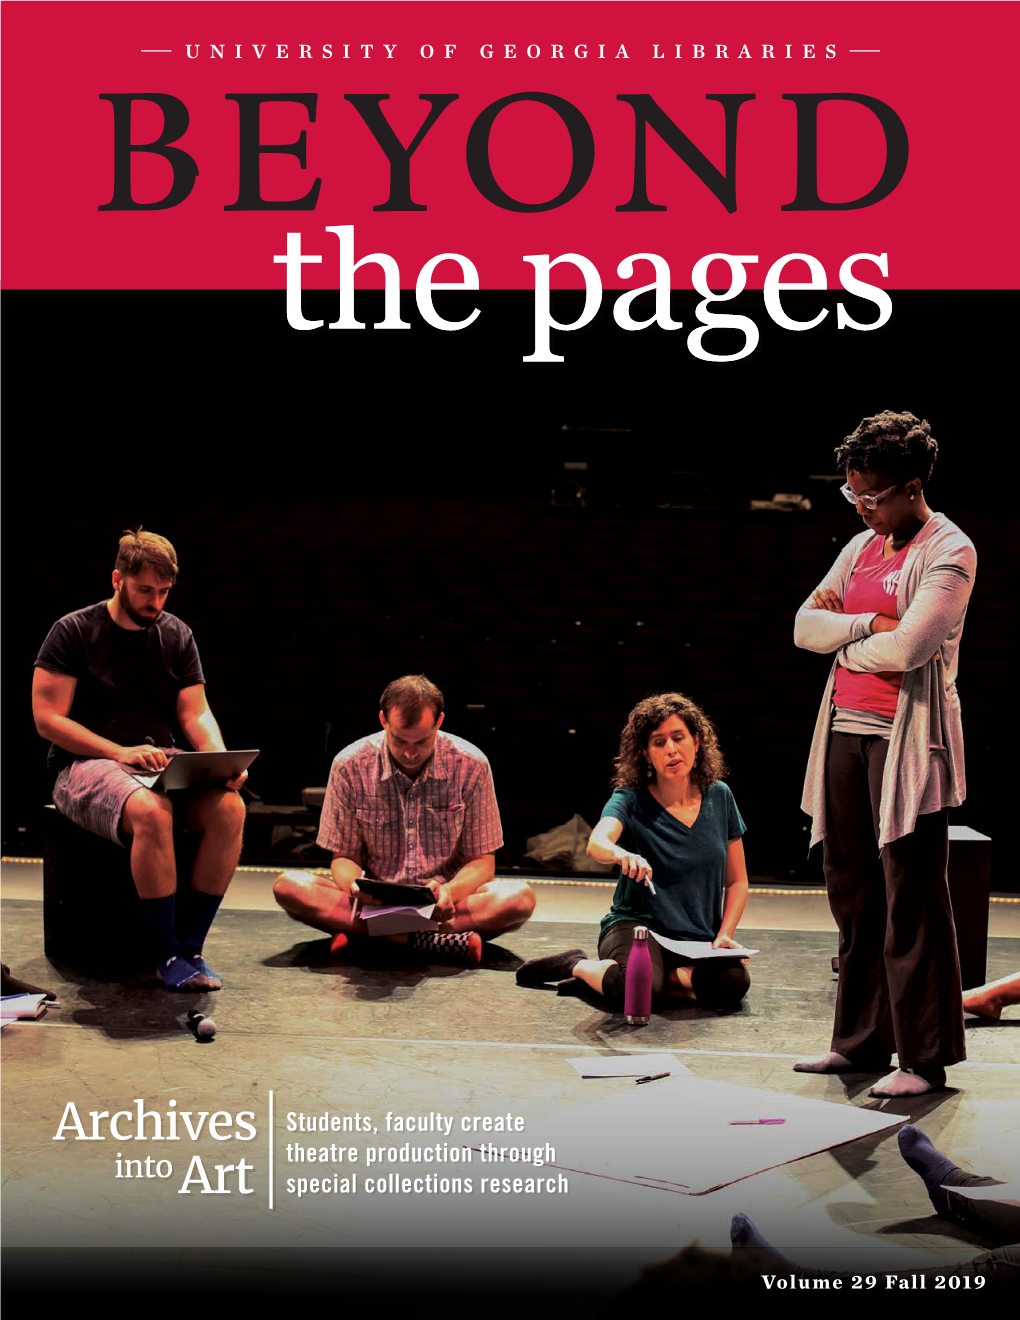 Archives Students, Faculty Create Theatre Production Through Into Art Special Collections Research